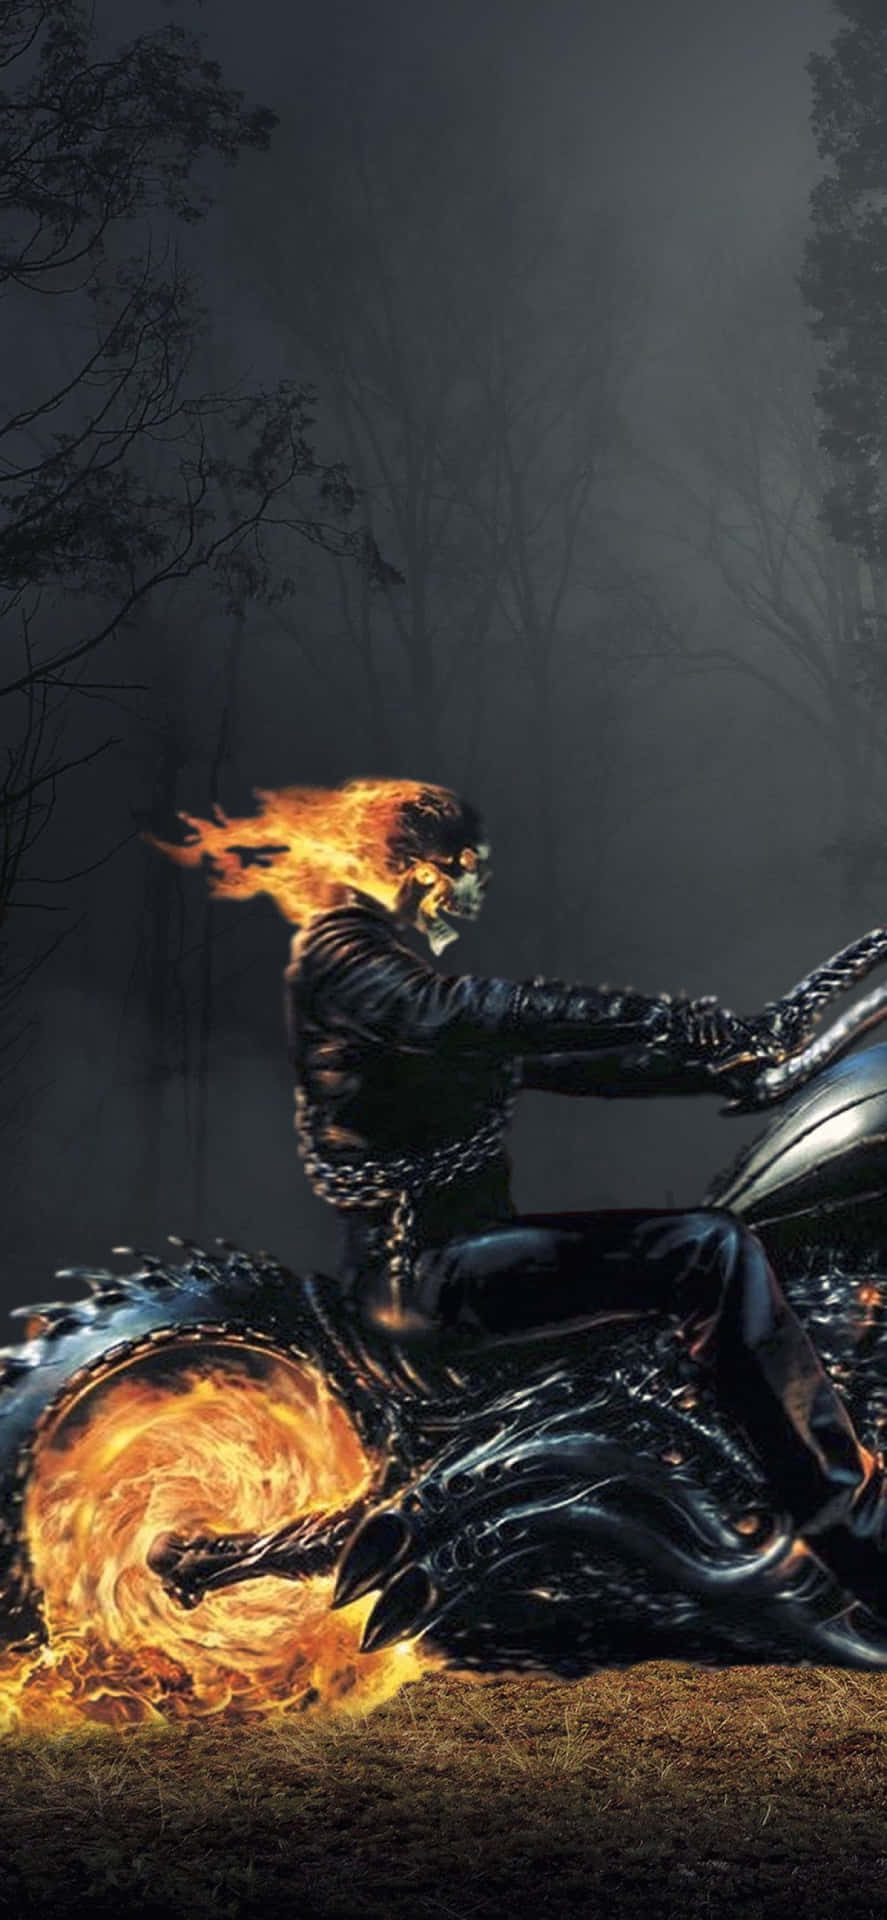 Blaze new trails with the legendary Ghost Rider!